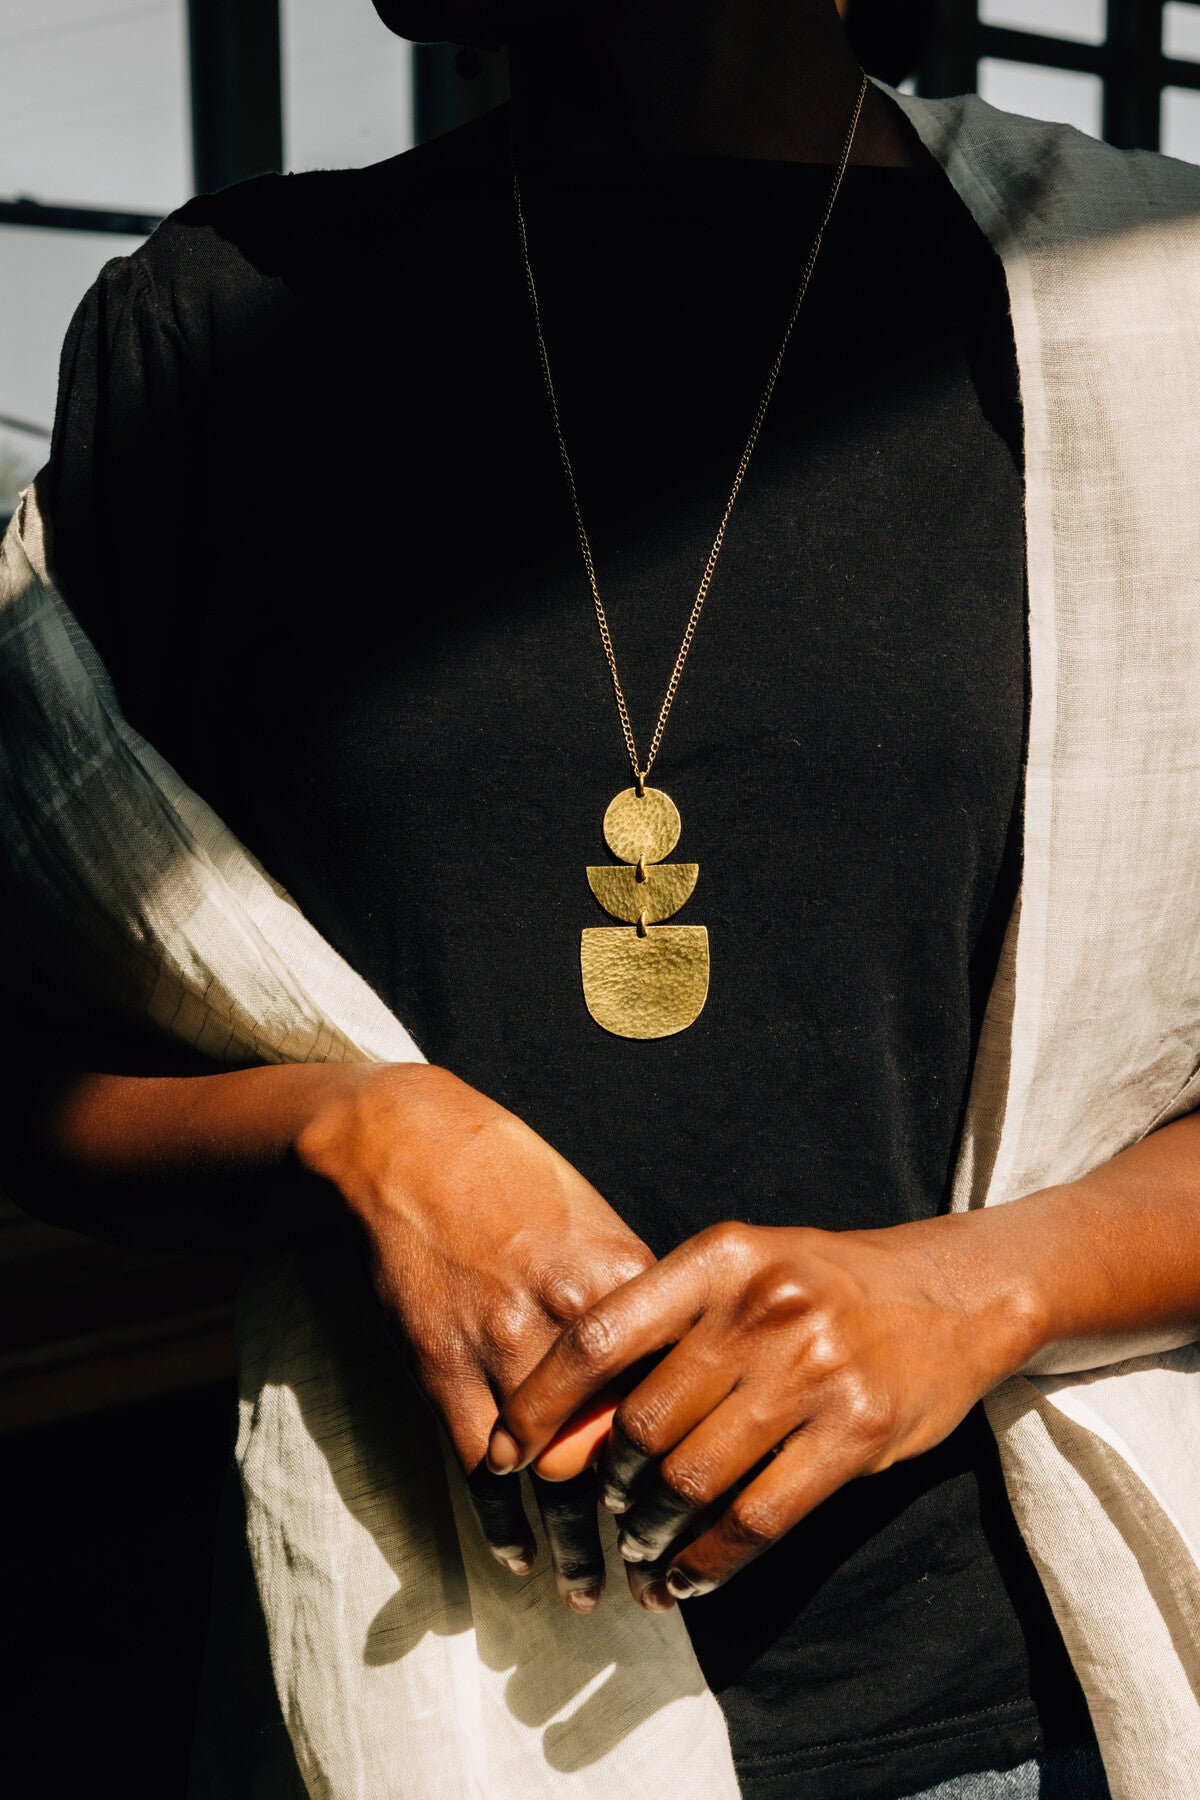 A geometric gold necklace is worn by a woman with a black turtleneck.